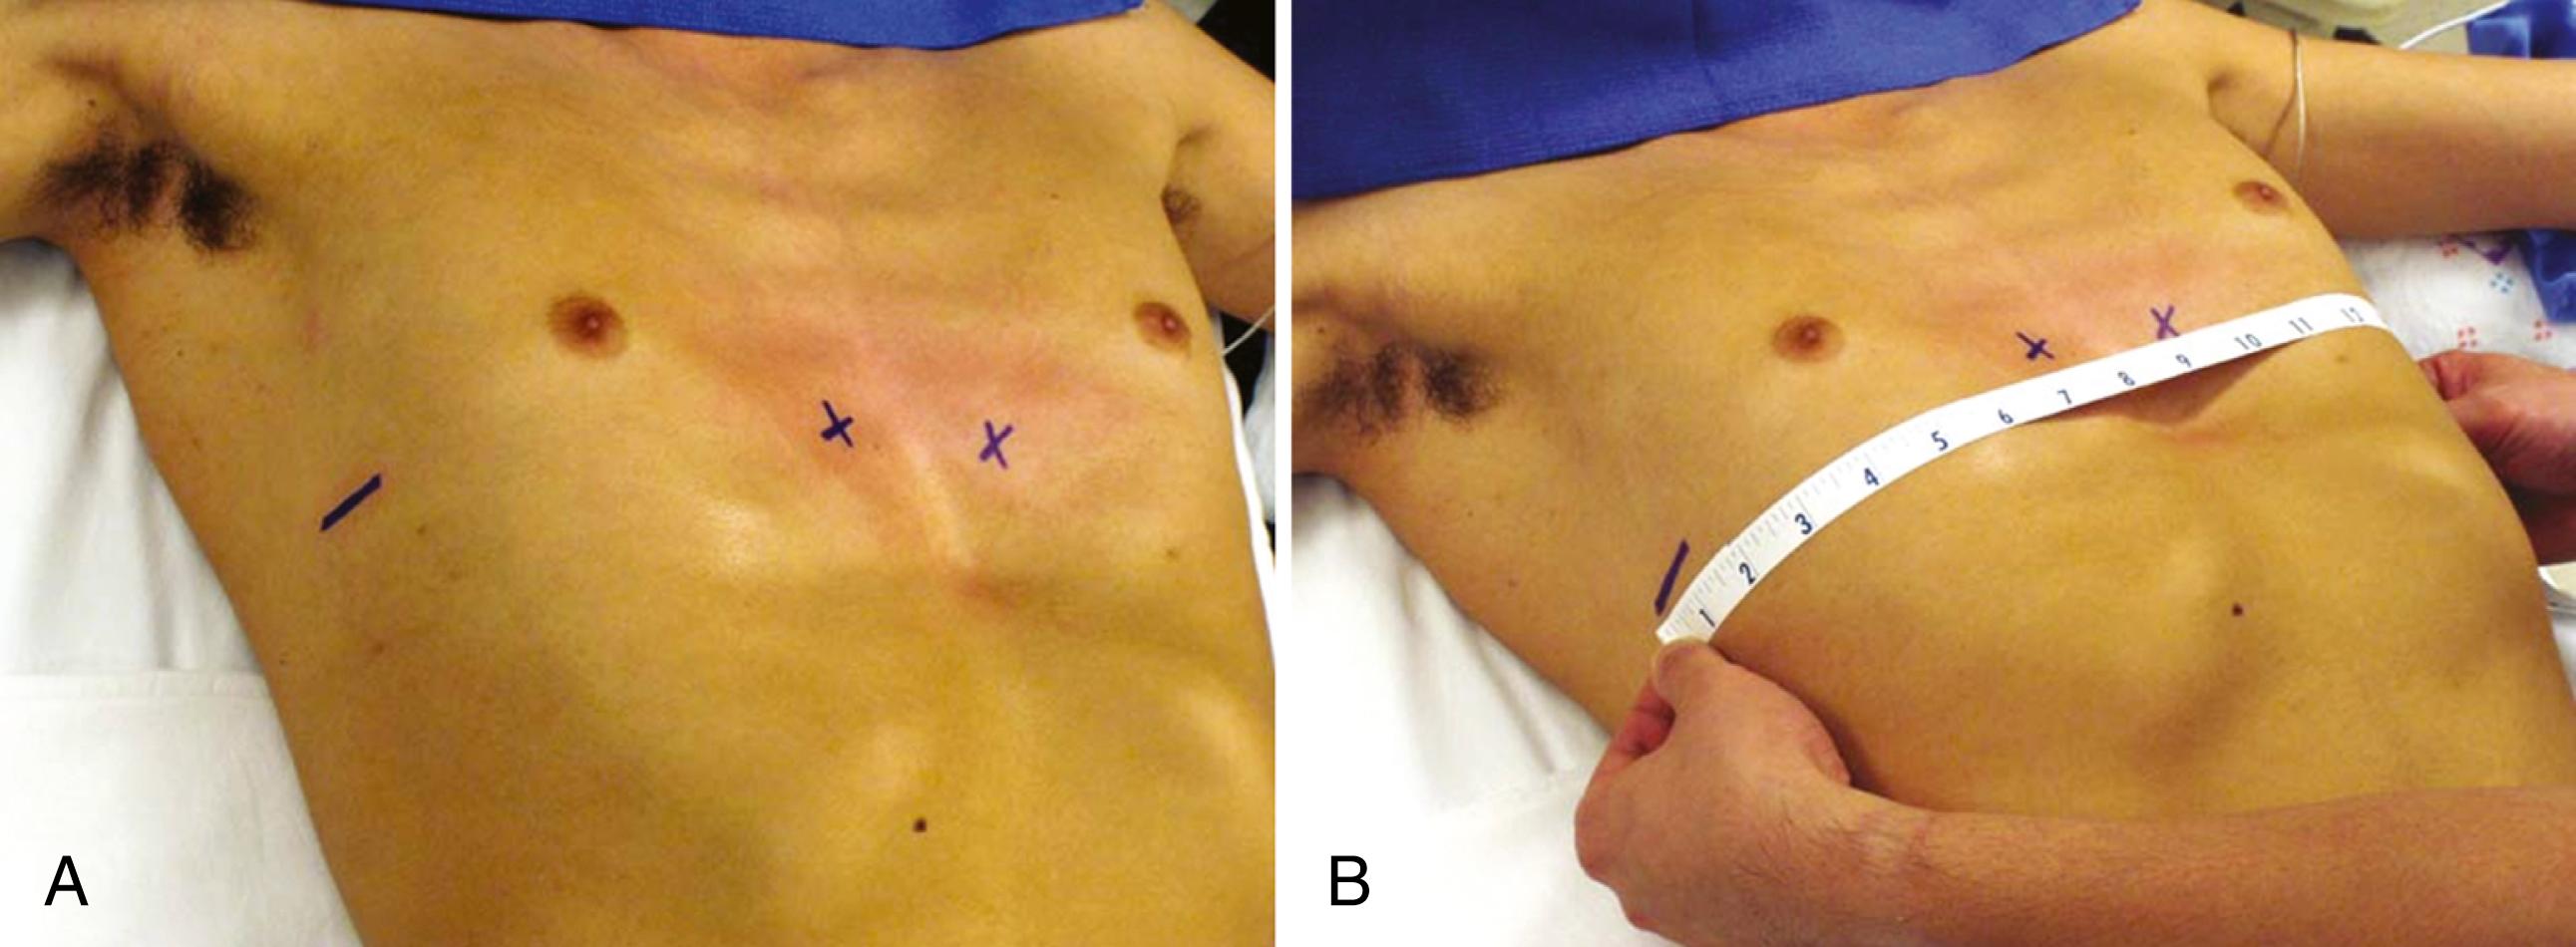 Fig. 40-3, A, The patient is positioned supine on the operating table with the arms abducted. The deepest point of the depression at the lower end of the sternum is noted. The bar entry and exit sites into and out of the mediastinum are marked with an X, and the lateral thoracic incisions are marked with a horizontal line. B, The chest is measured from the right midaxillary line to the left midaxillary line. The bar should be this measured length minus 1 inch.